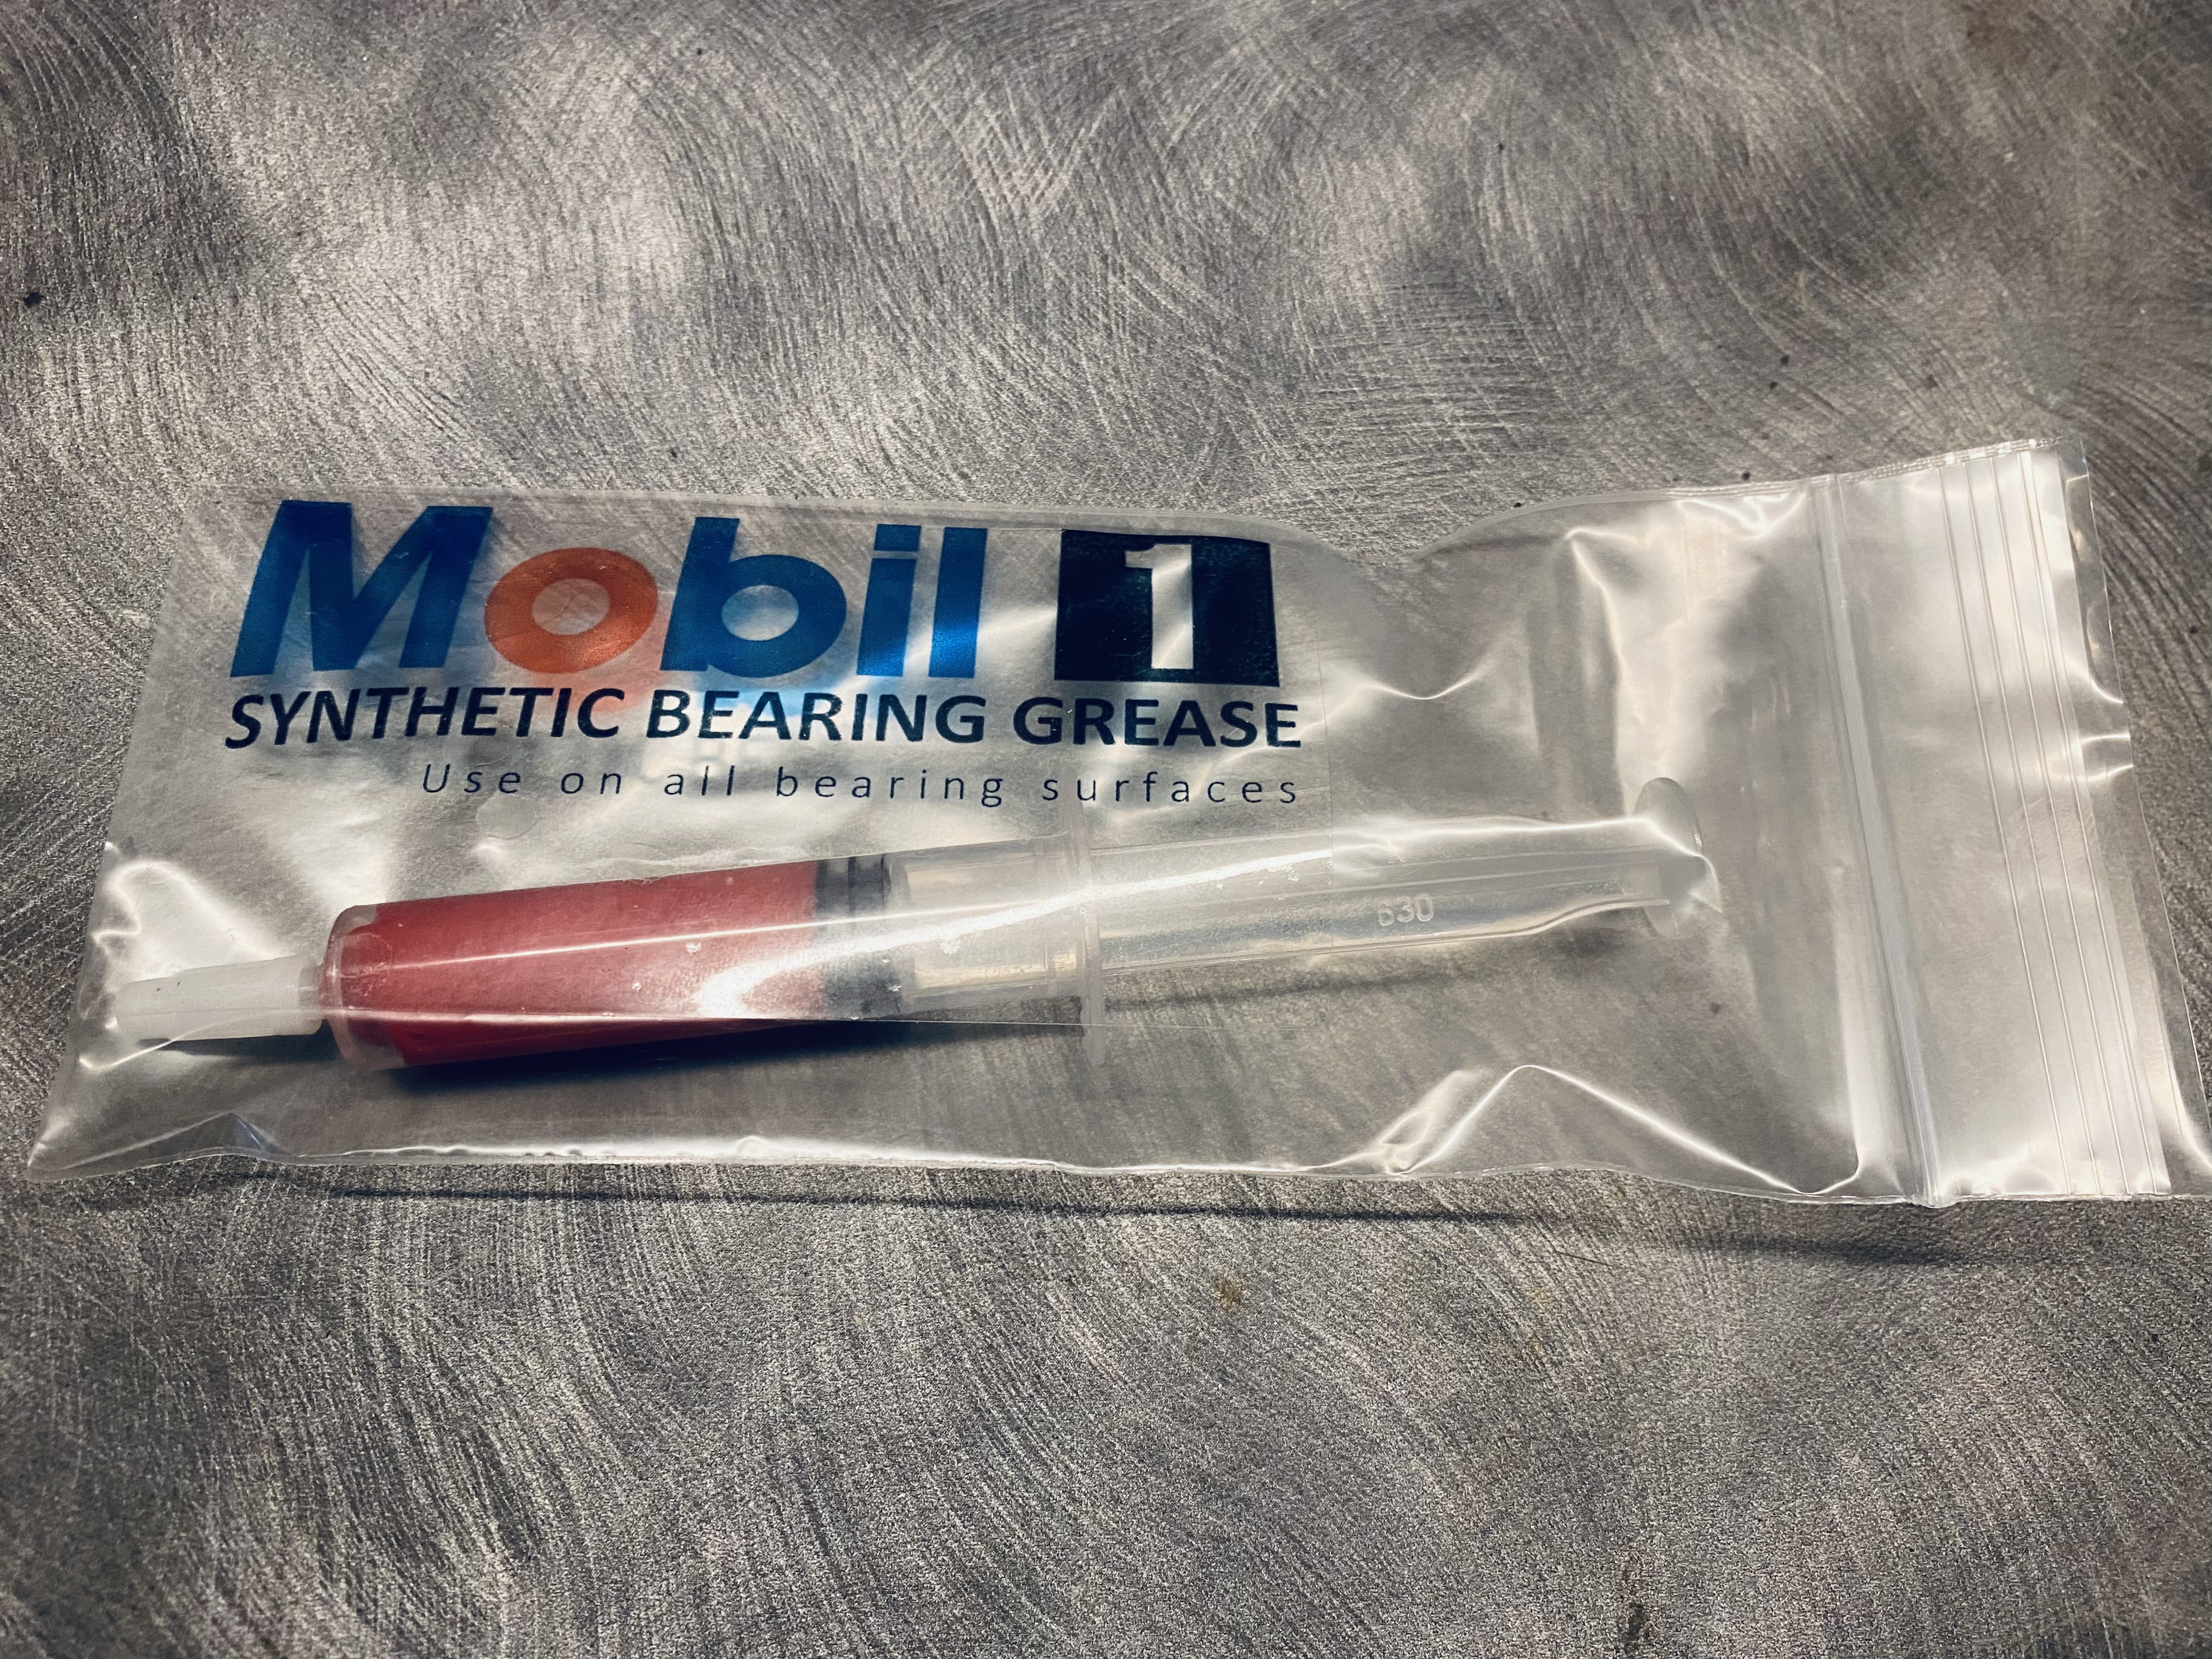 Mobil 1 Synthetic Bearing Grease